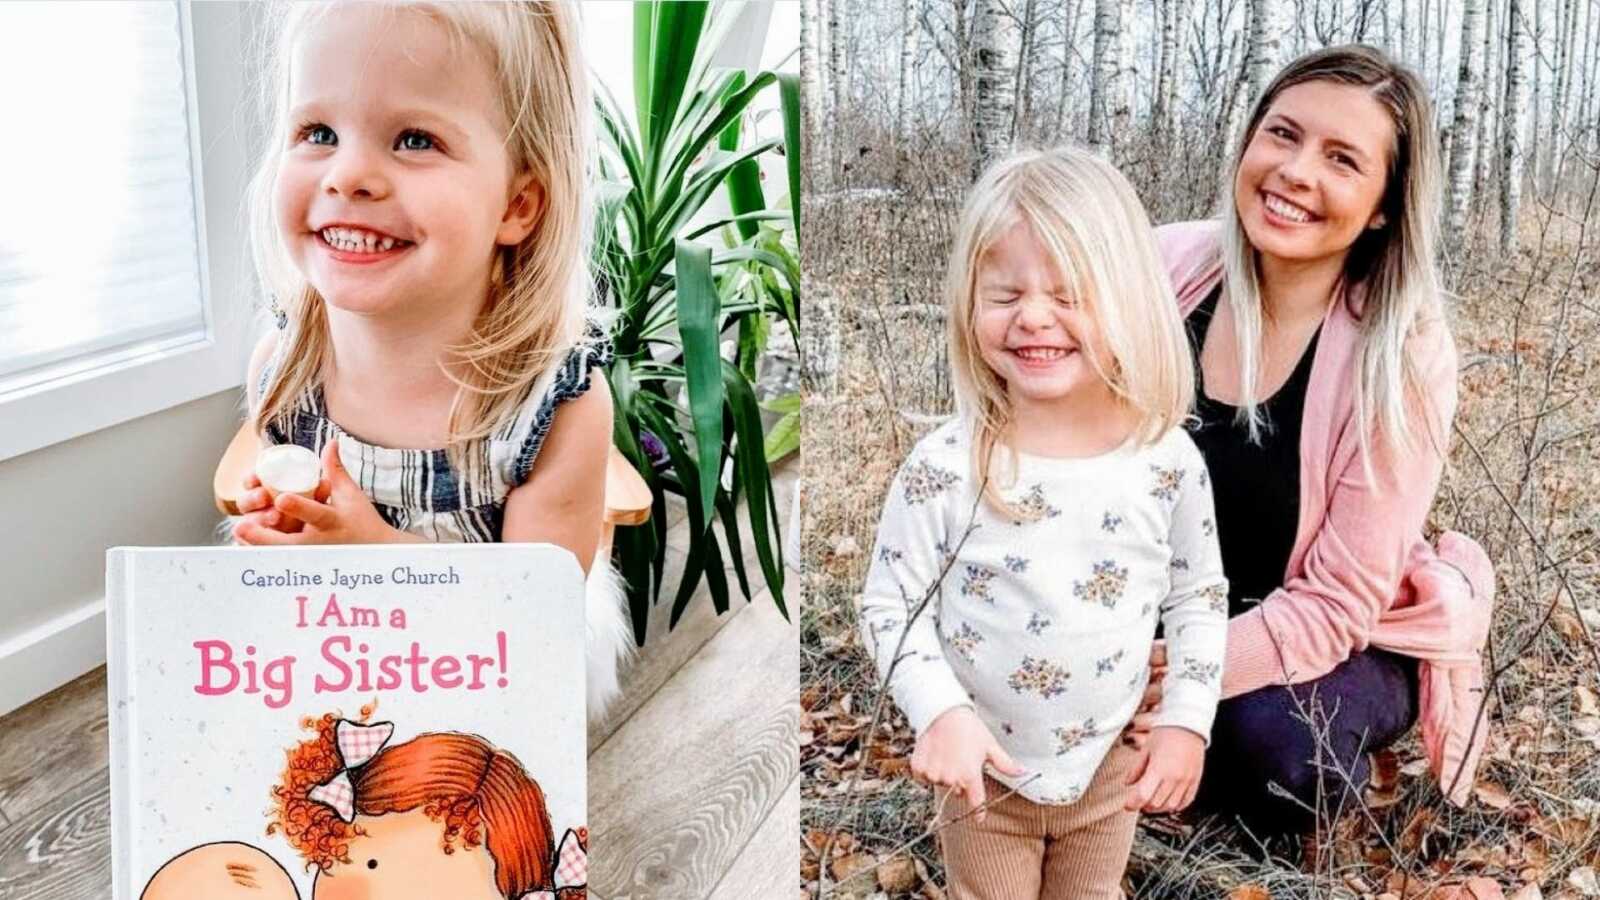 Mom shares photos with her firstborn daughter while preparing for her second child